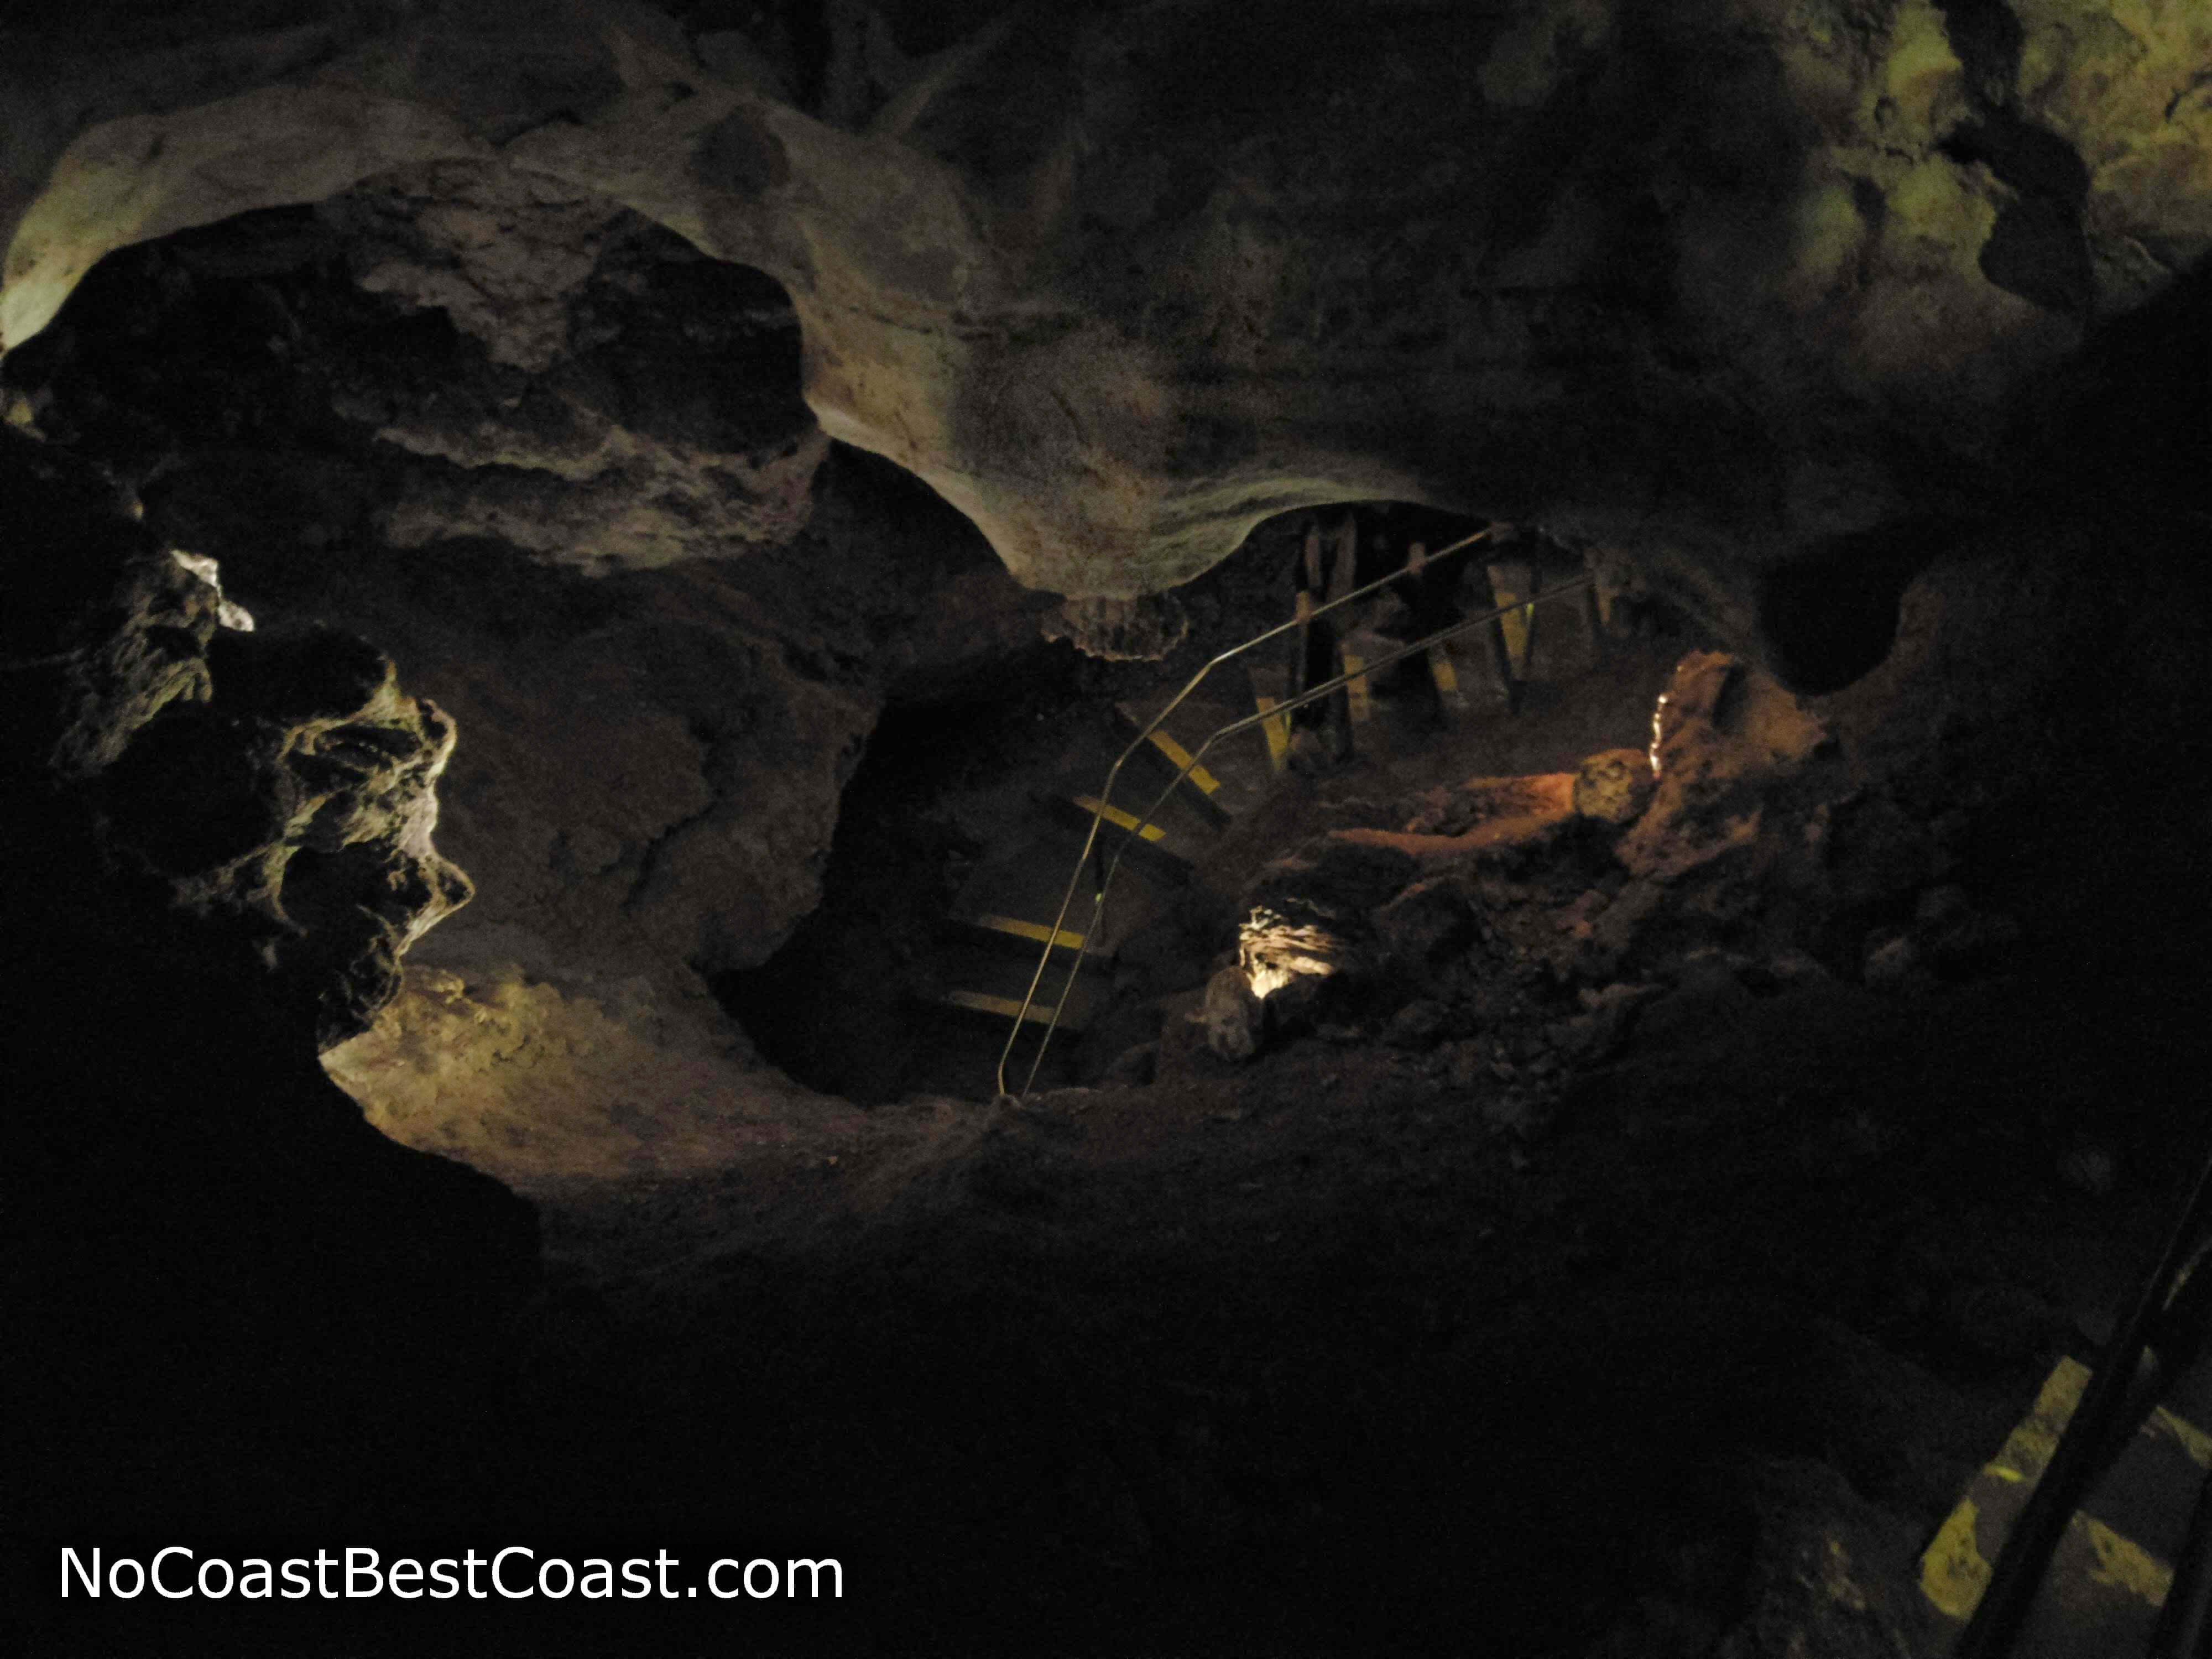 Stairs descending deep into the cave